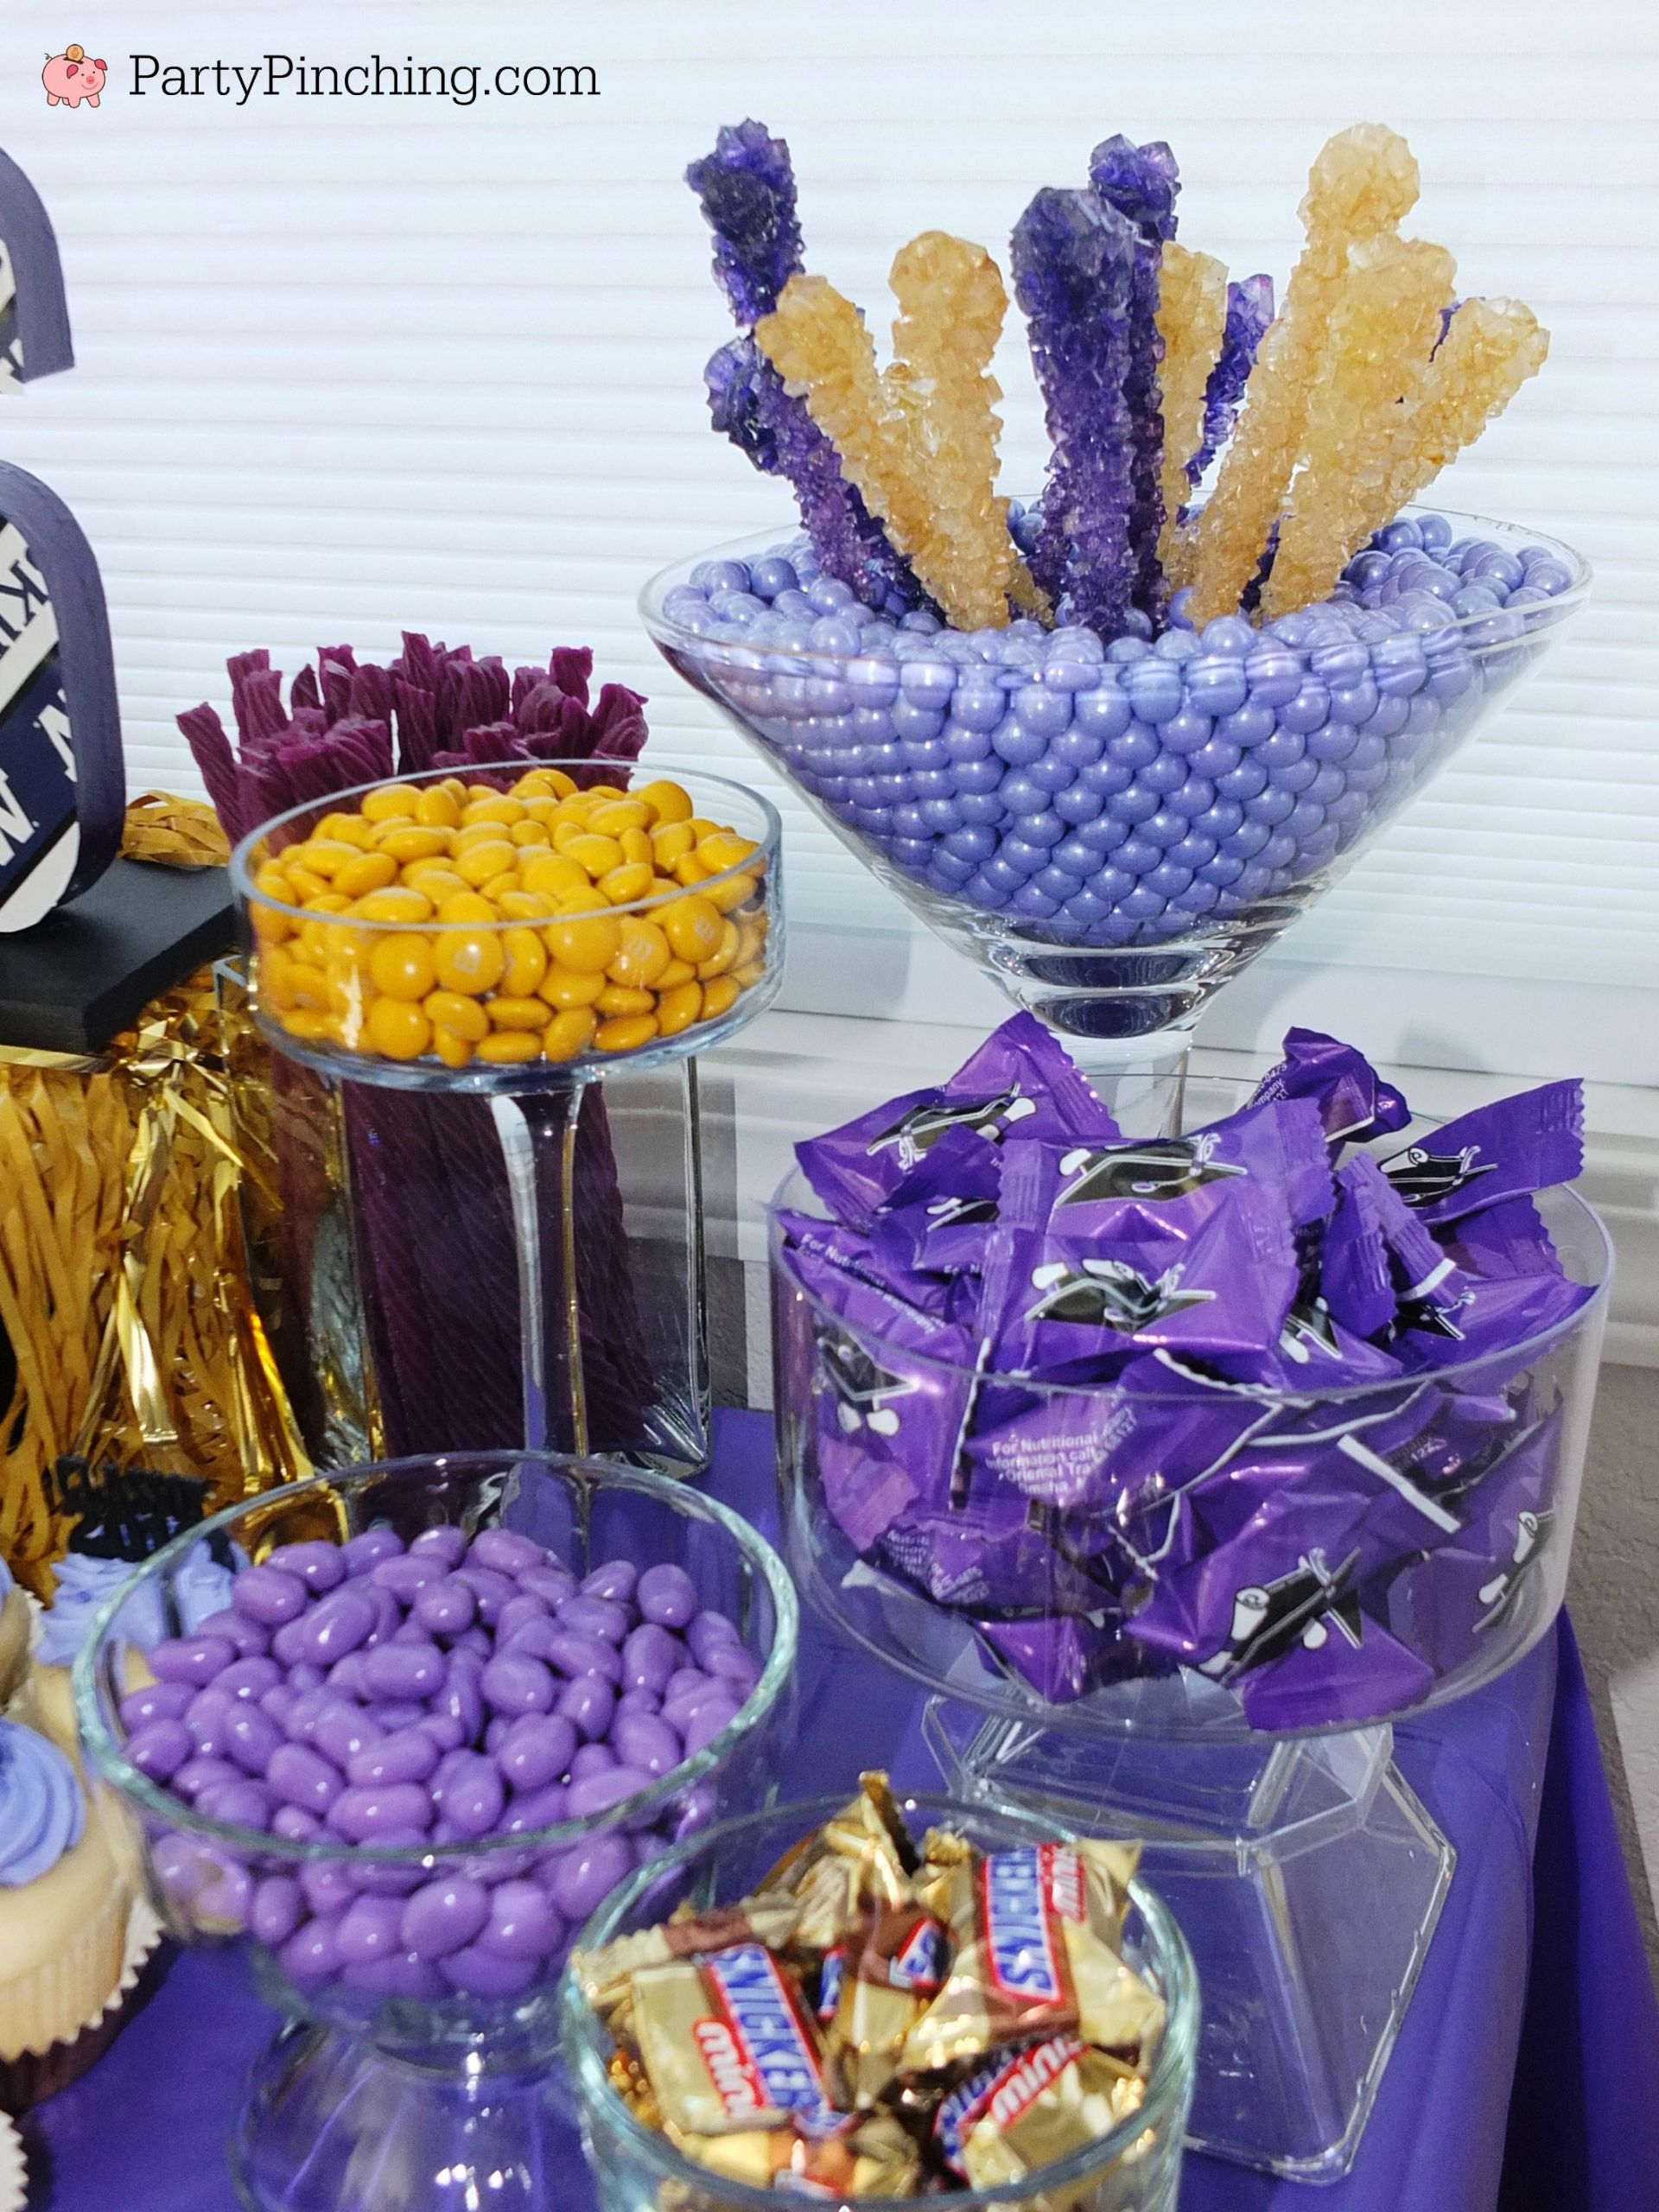 College Birthday Party Ideas
 College Graduation Party Graduation Party Ideas and Food